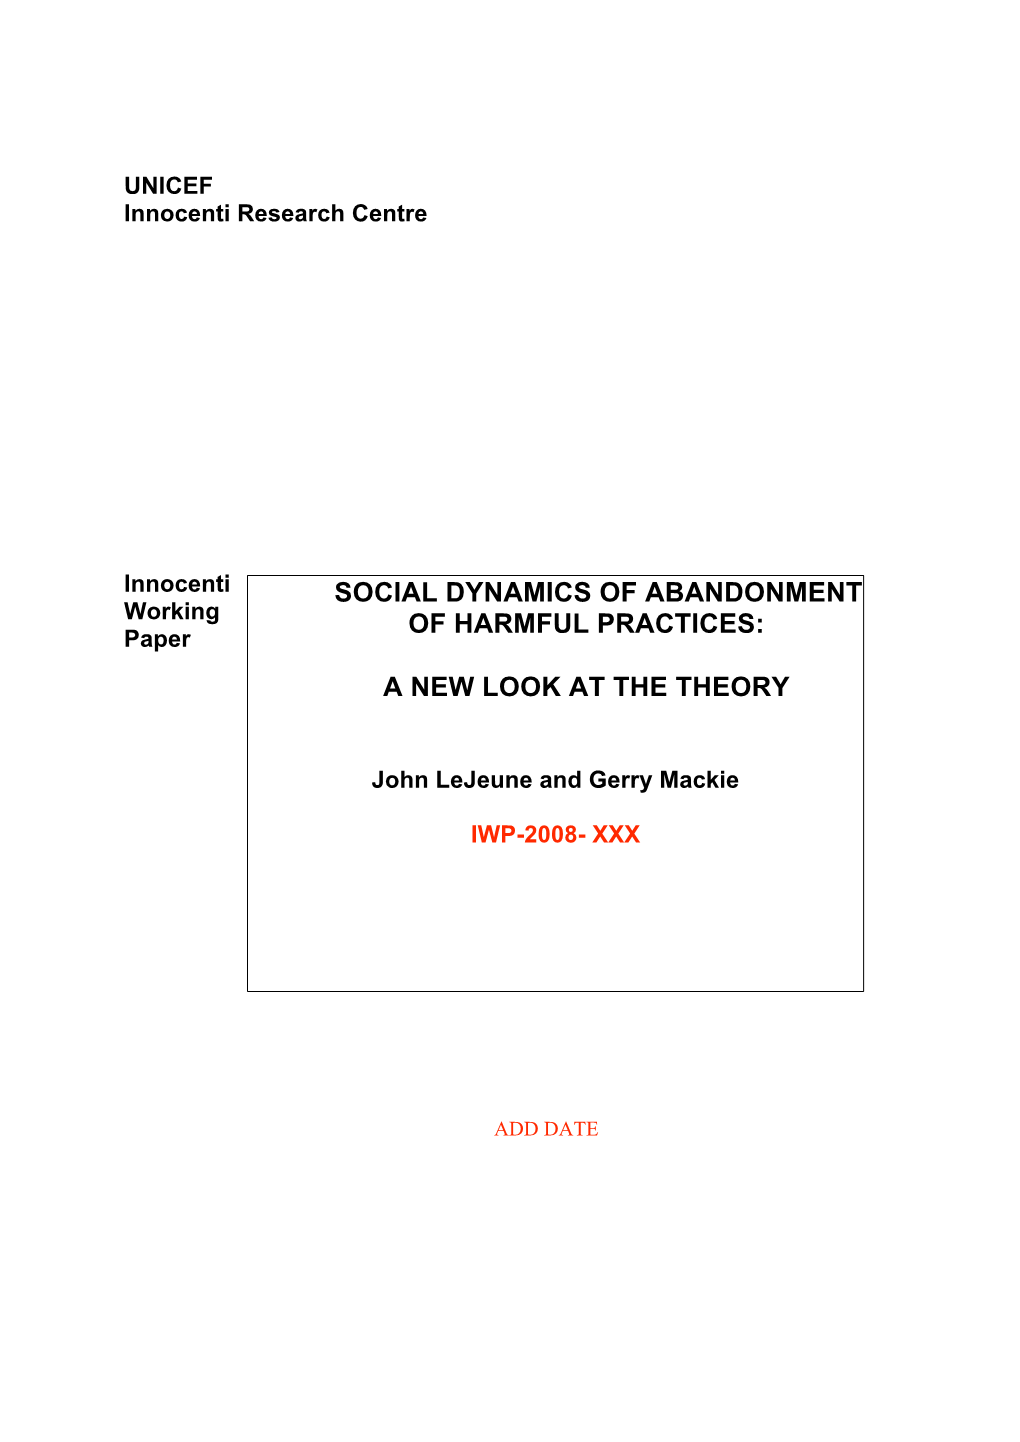 Social Dynamics of Abandonment of Harmful Practices: a New Look at the Theory’, Innocenti Working Paper No